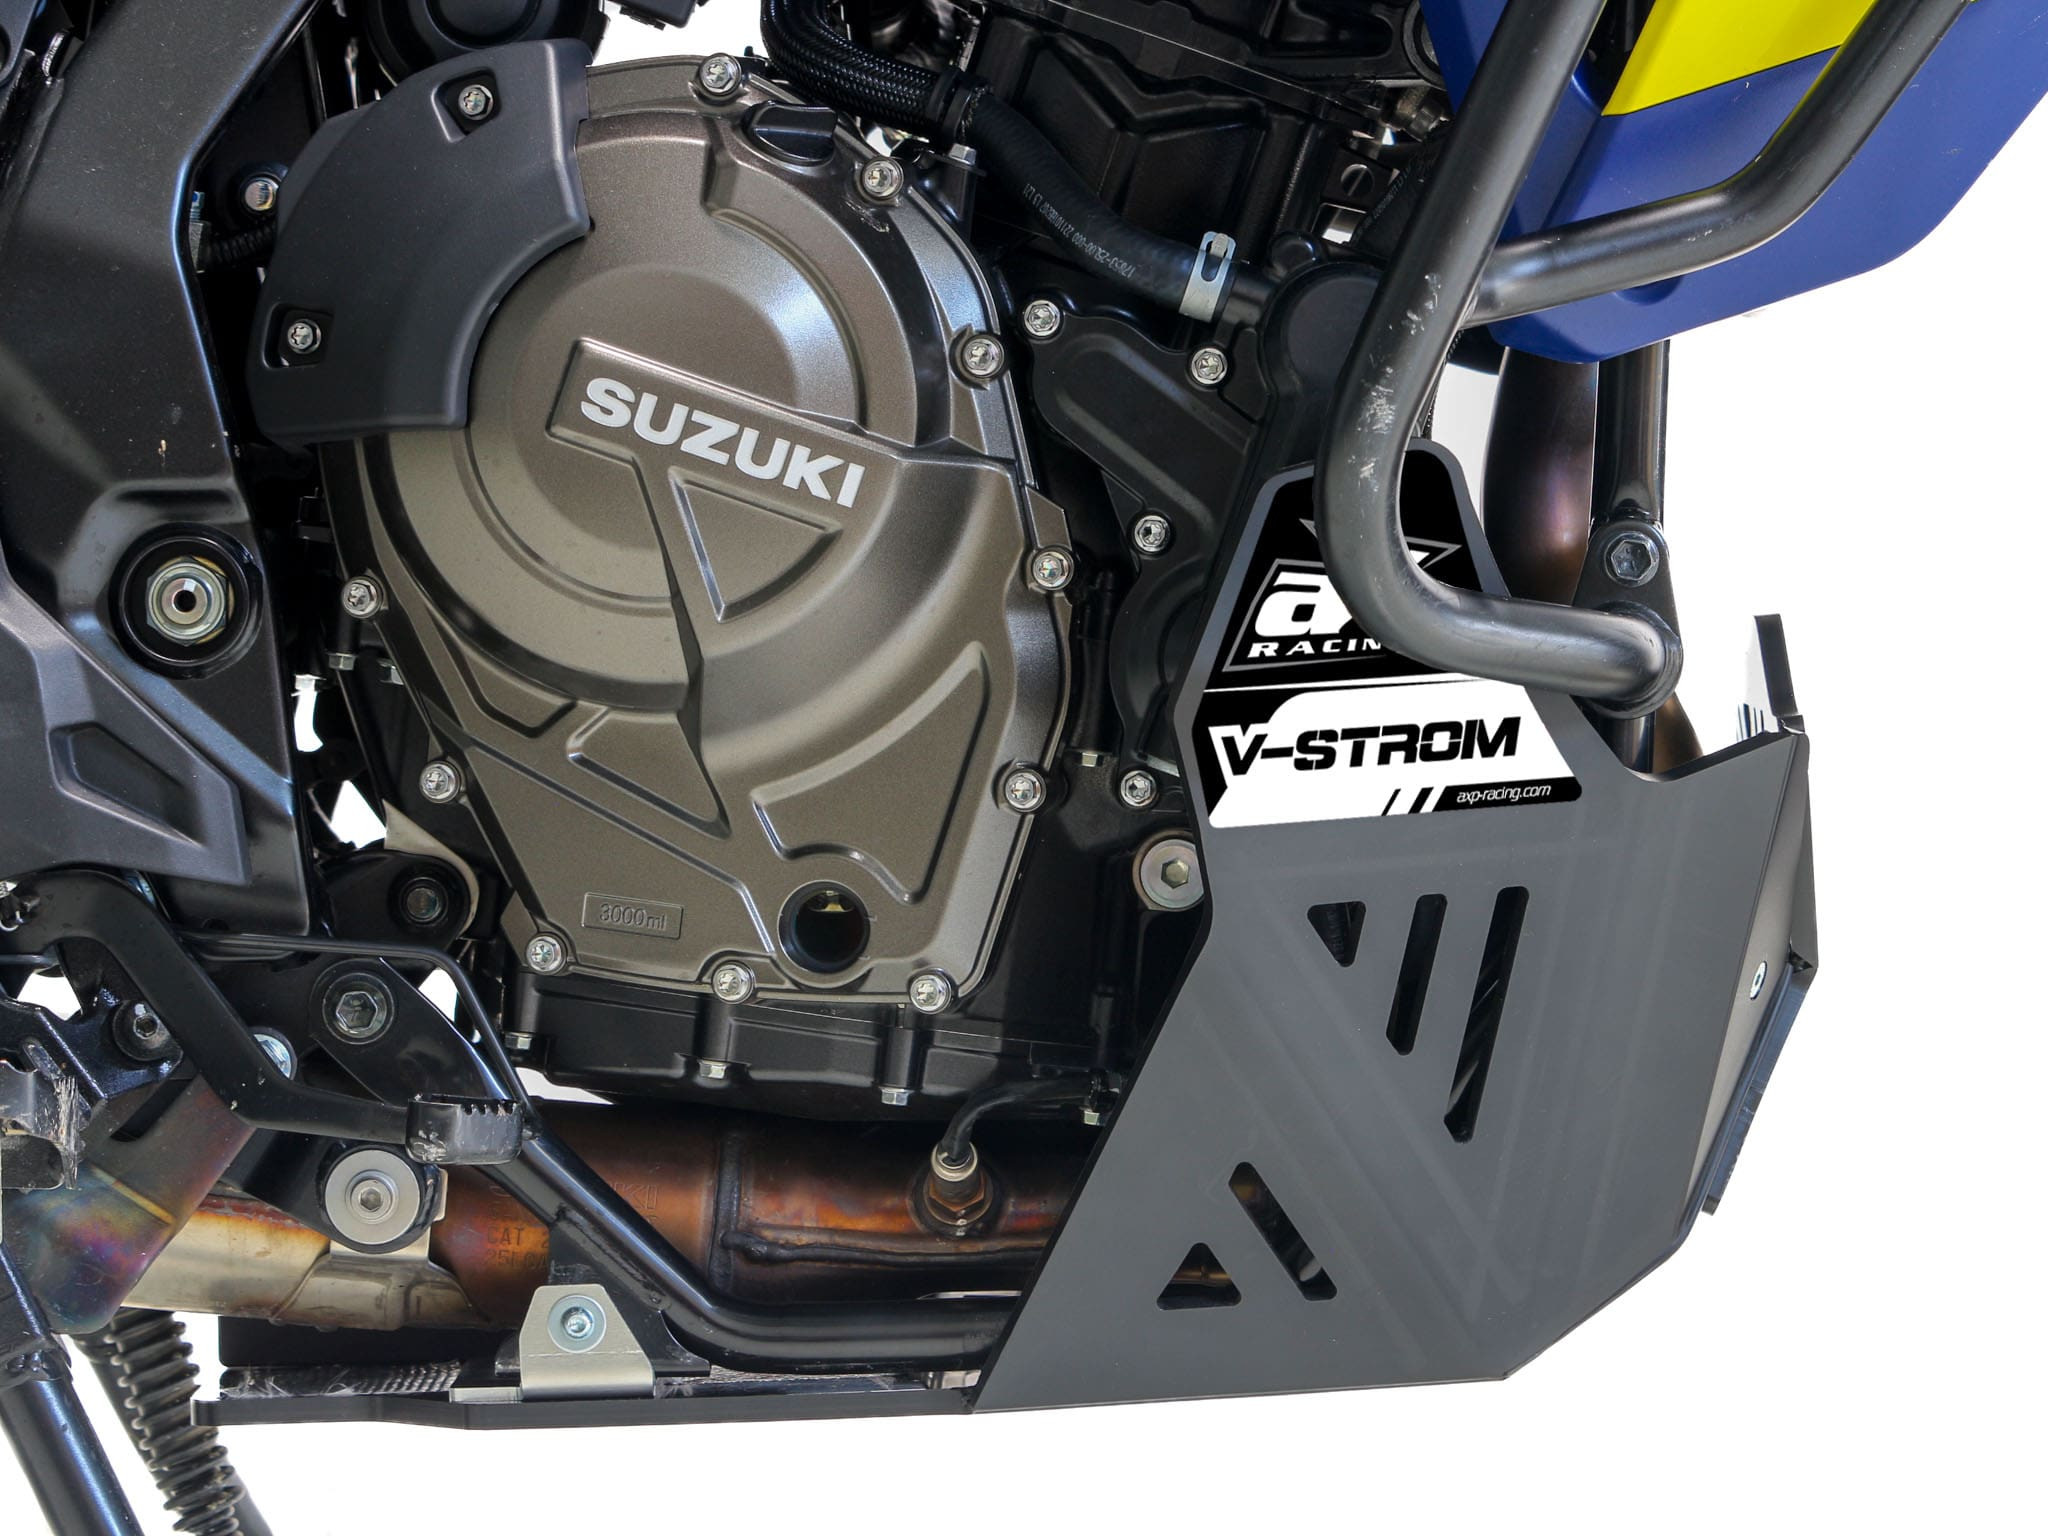 Right side of a black HDPE skid plate mounted on a Suzuki V-strom 800DE